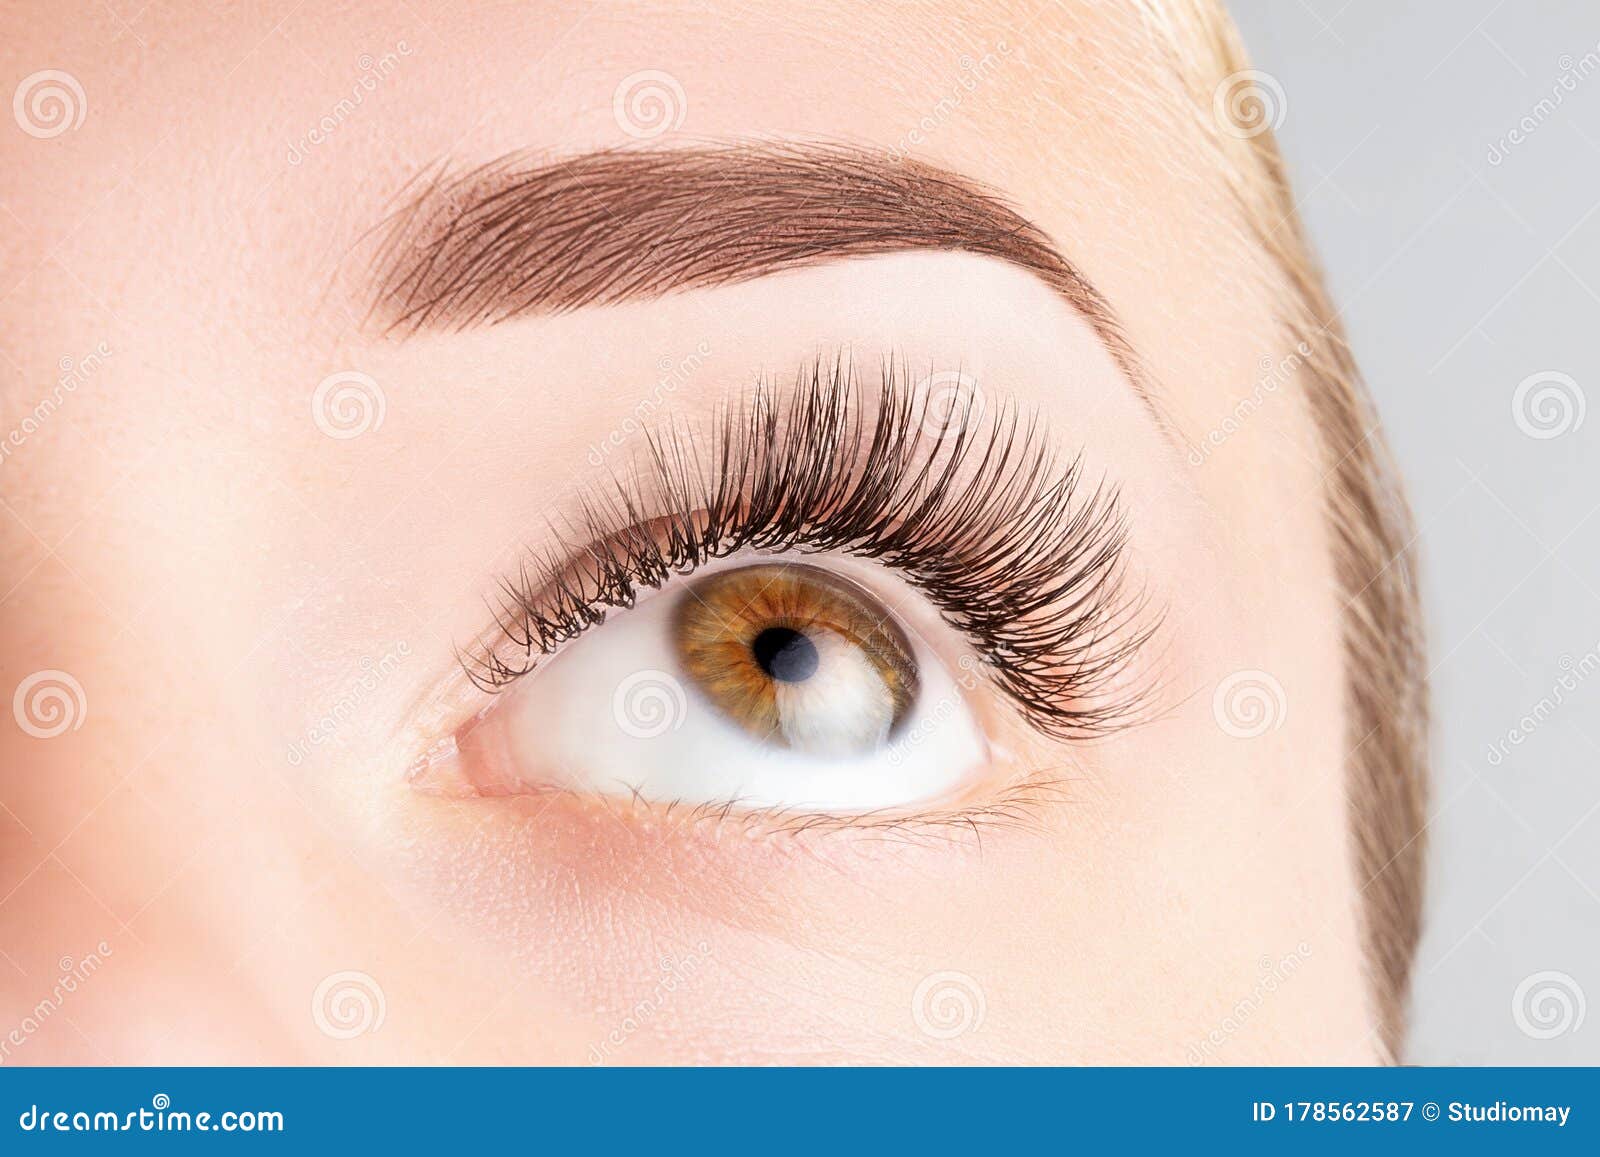 female eye with long eyelashes. classic 1d, 2d eyelash extensions and light brown eyebrow close up. eyelash extensions, lamination